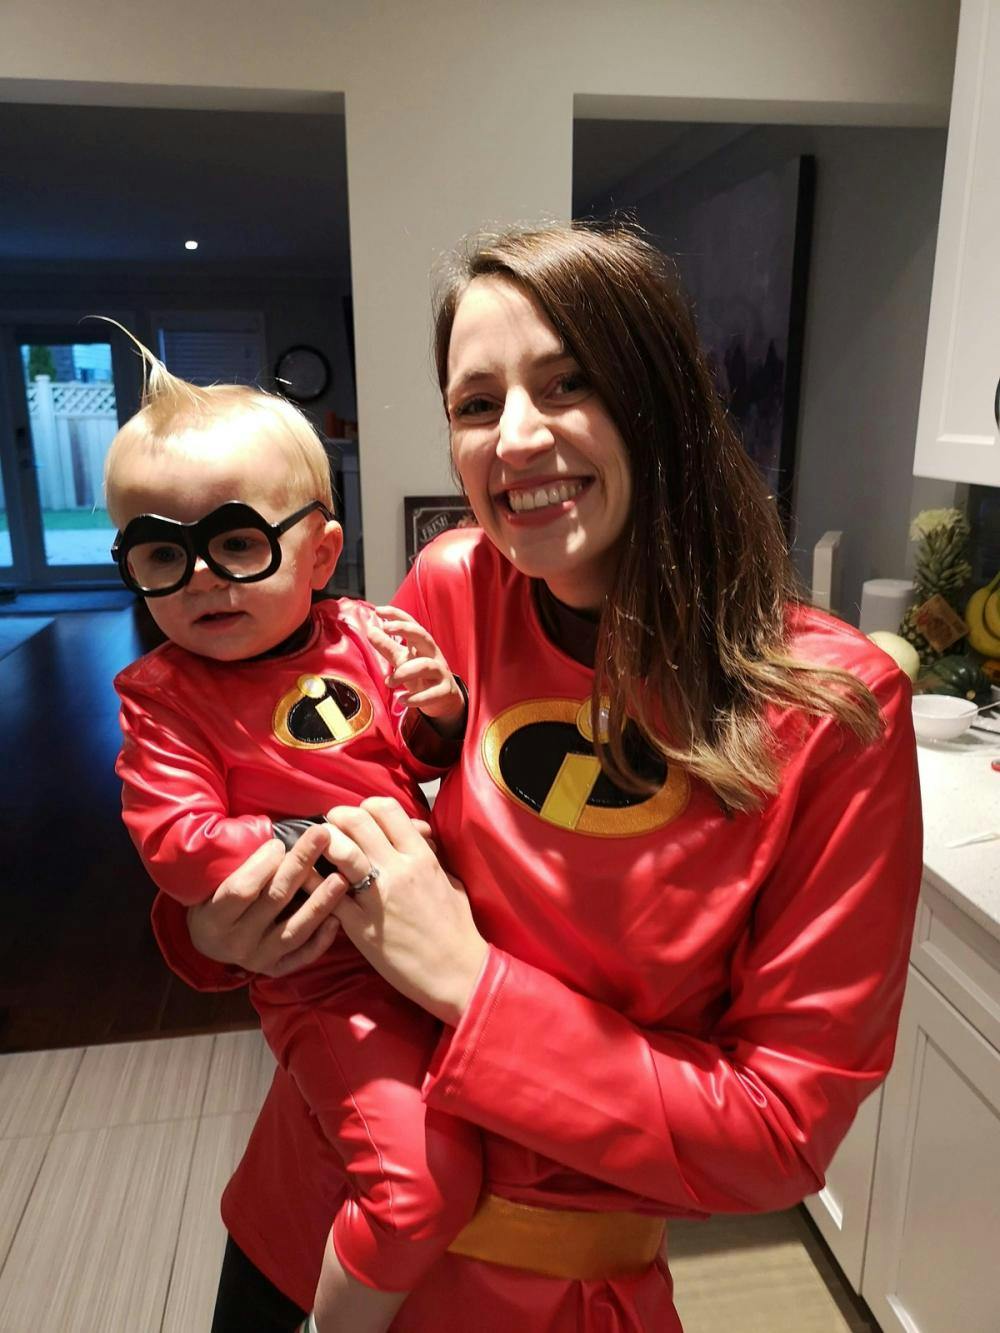 NJ and her toddler in matching costumes from 'The Incredibles'